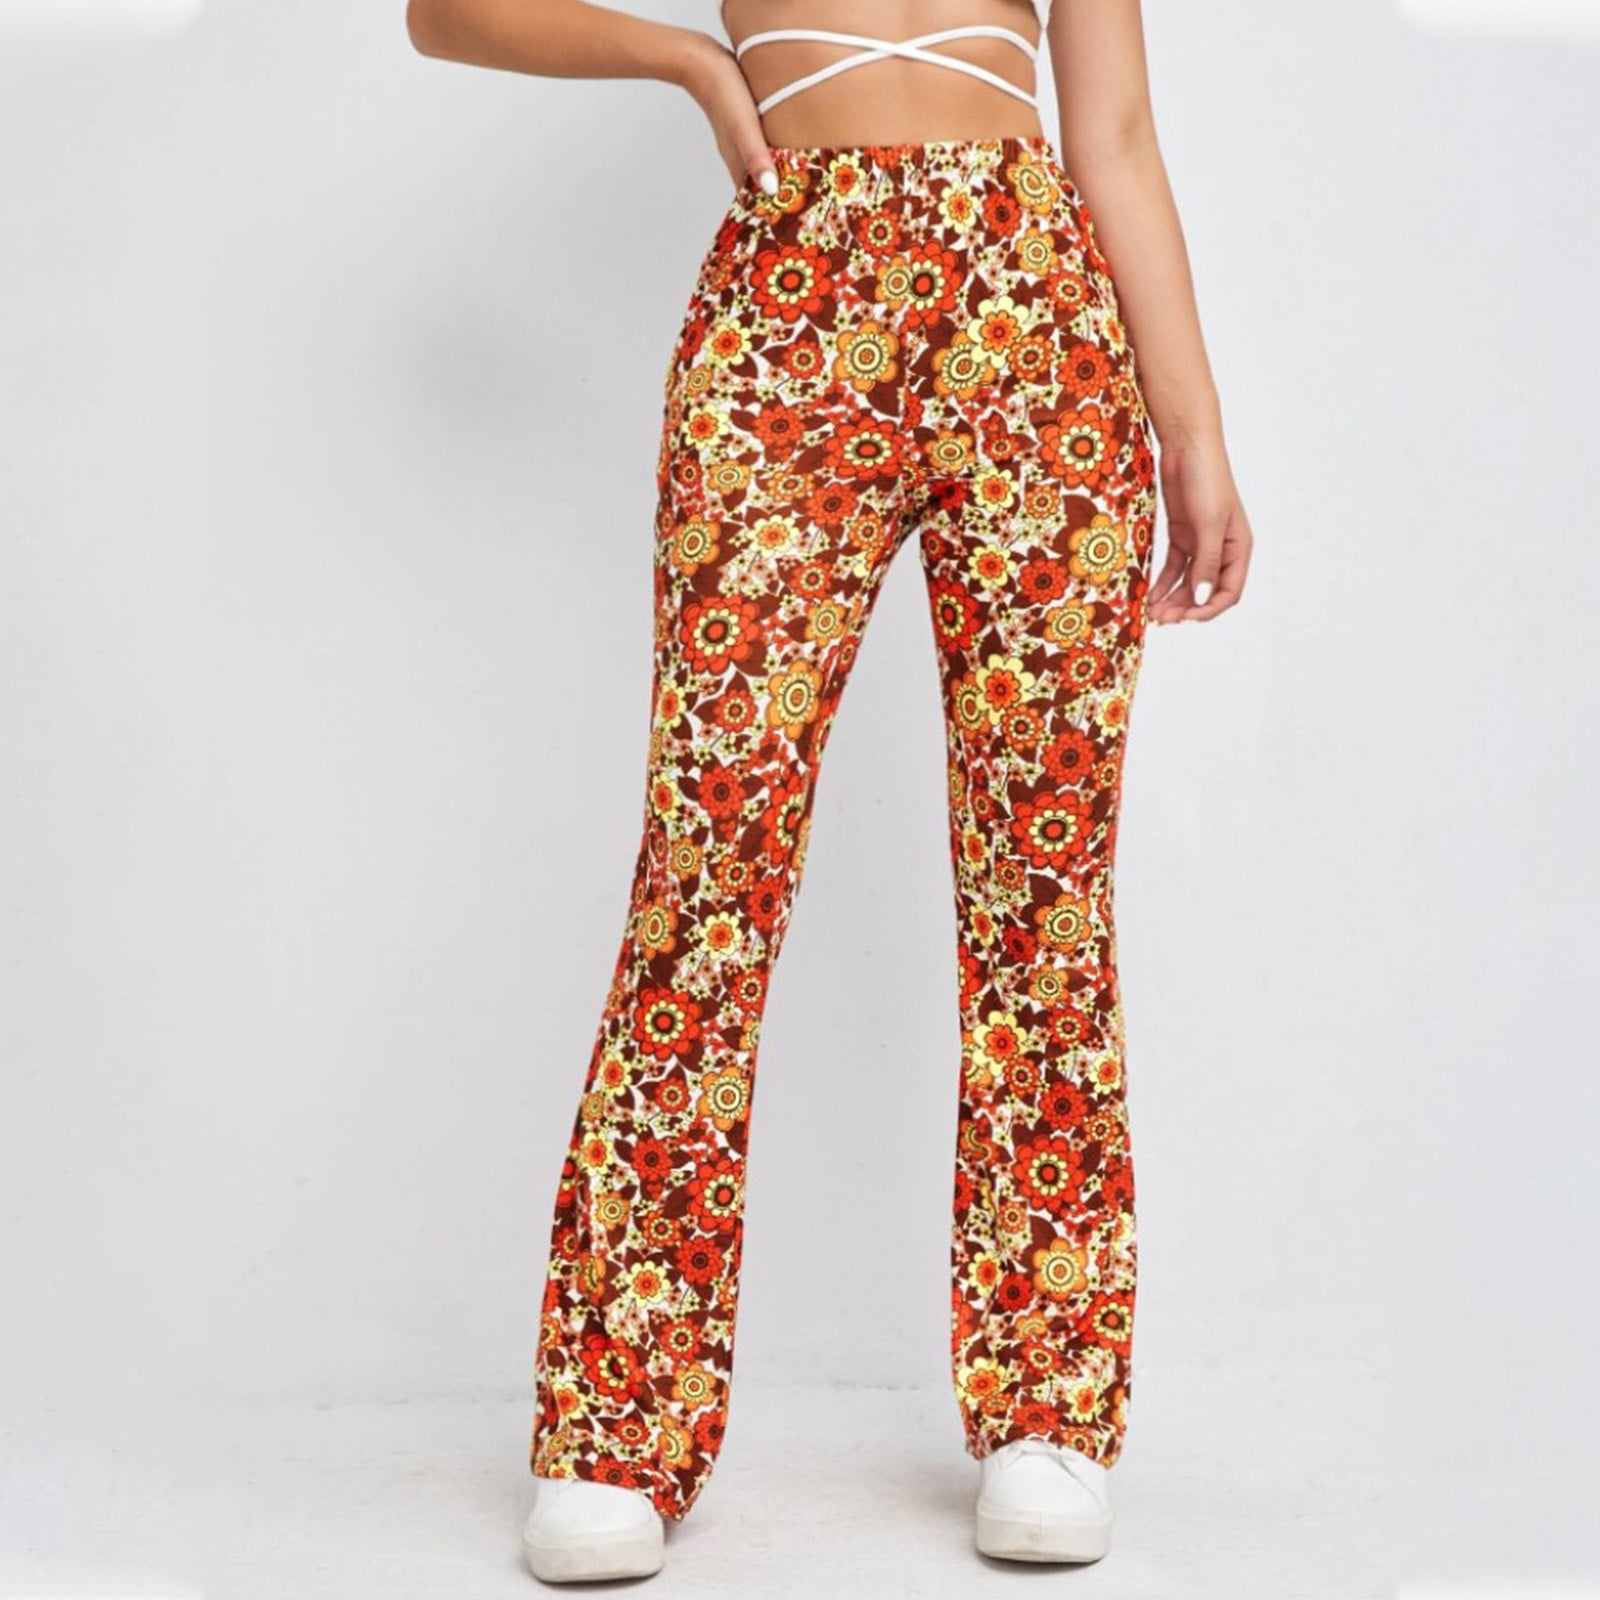 Suanret Womens Floral Print Boho Flare Pants Casual High Waist 90s Vintage  Stretch Bell Bottom Trousers Slim Fit Streetwear Yellow XXL